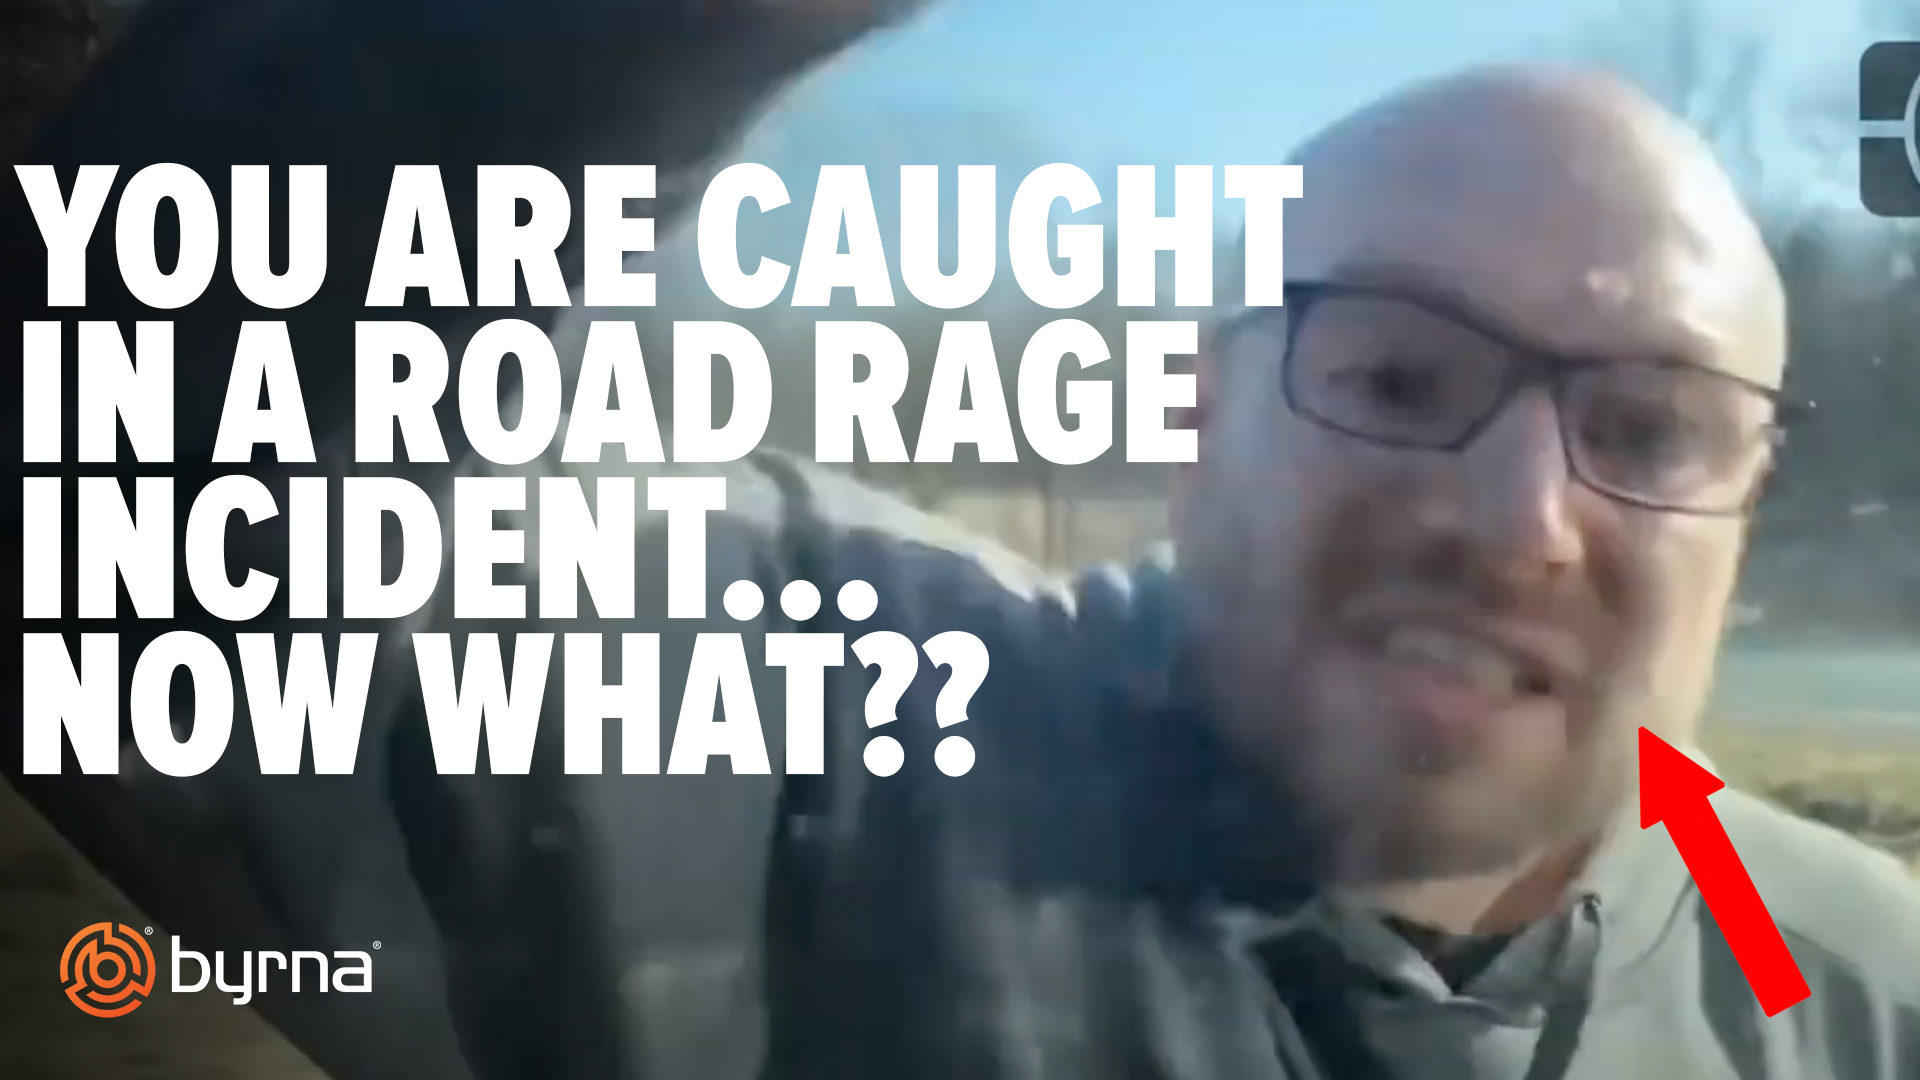 You are caught in road rage incident... Now What???